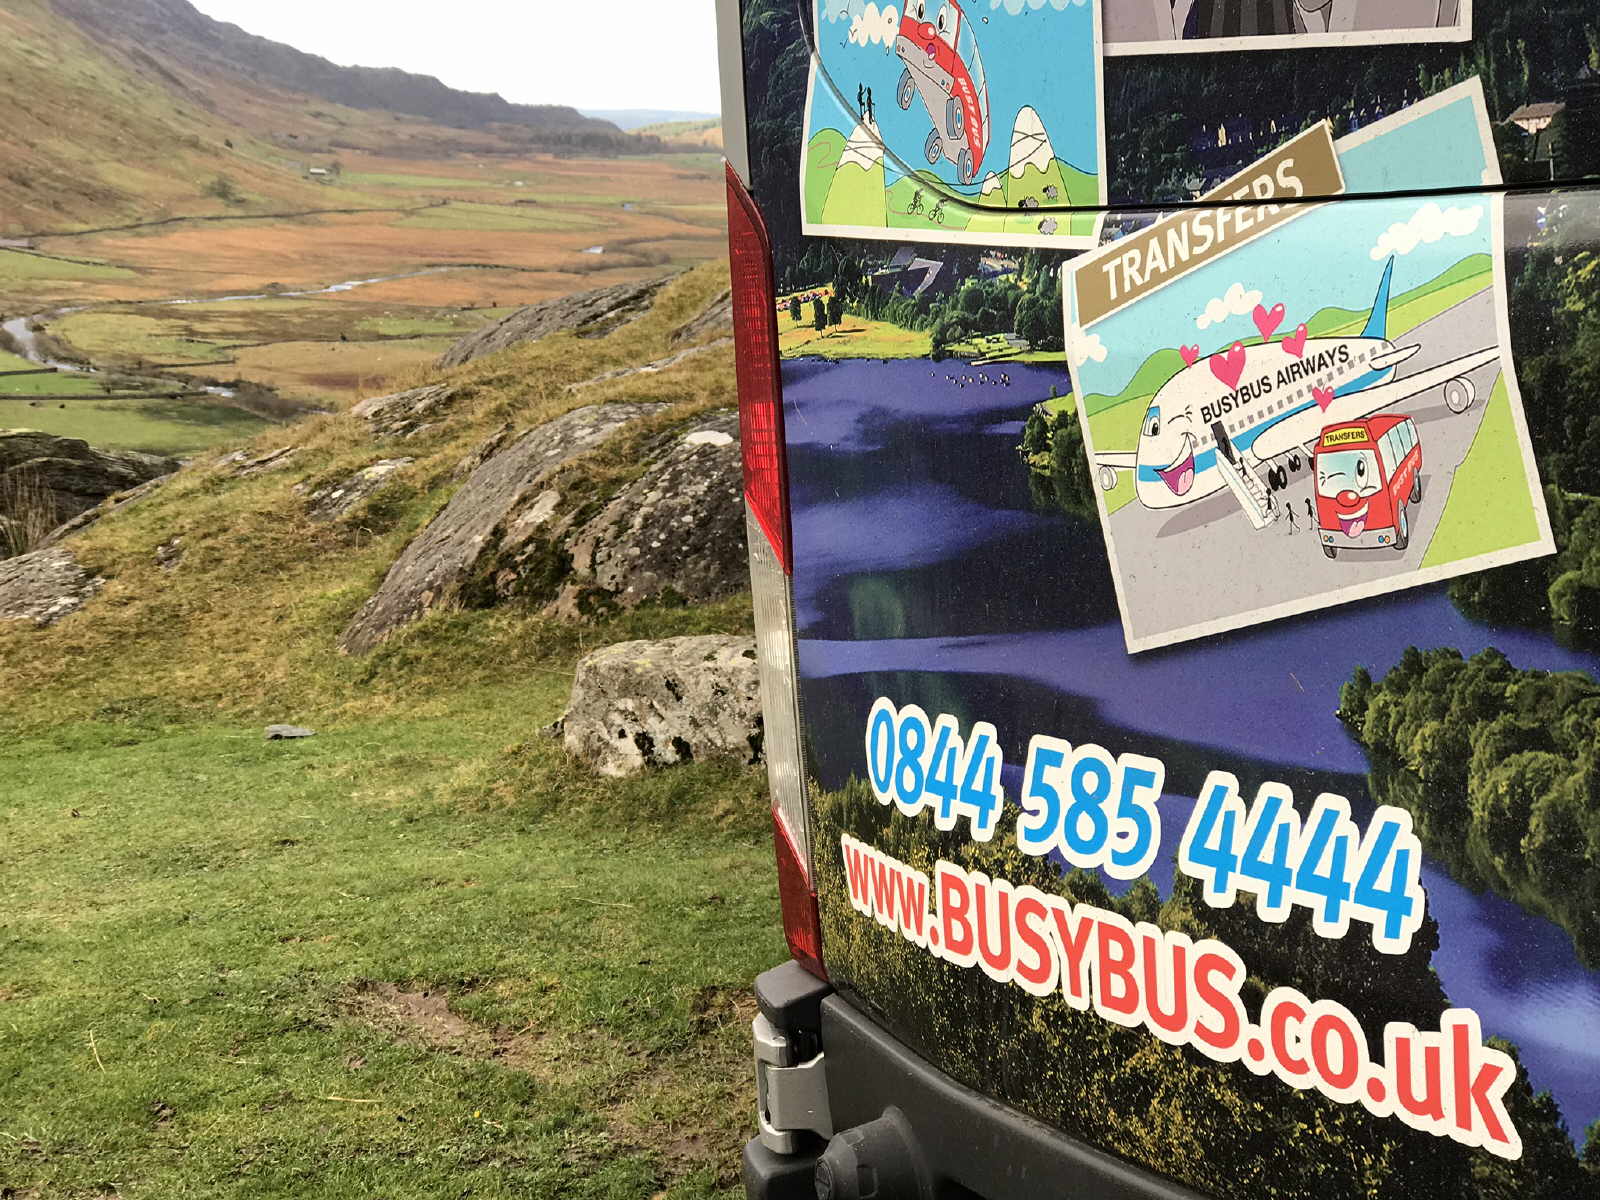 bus tours in wales